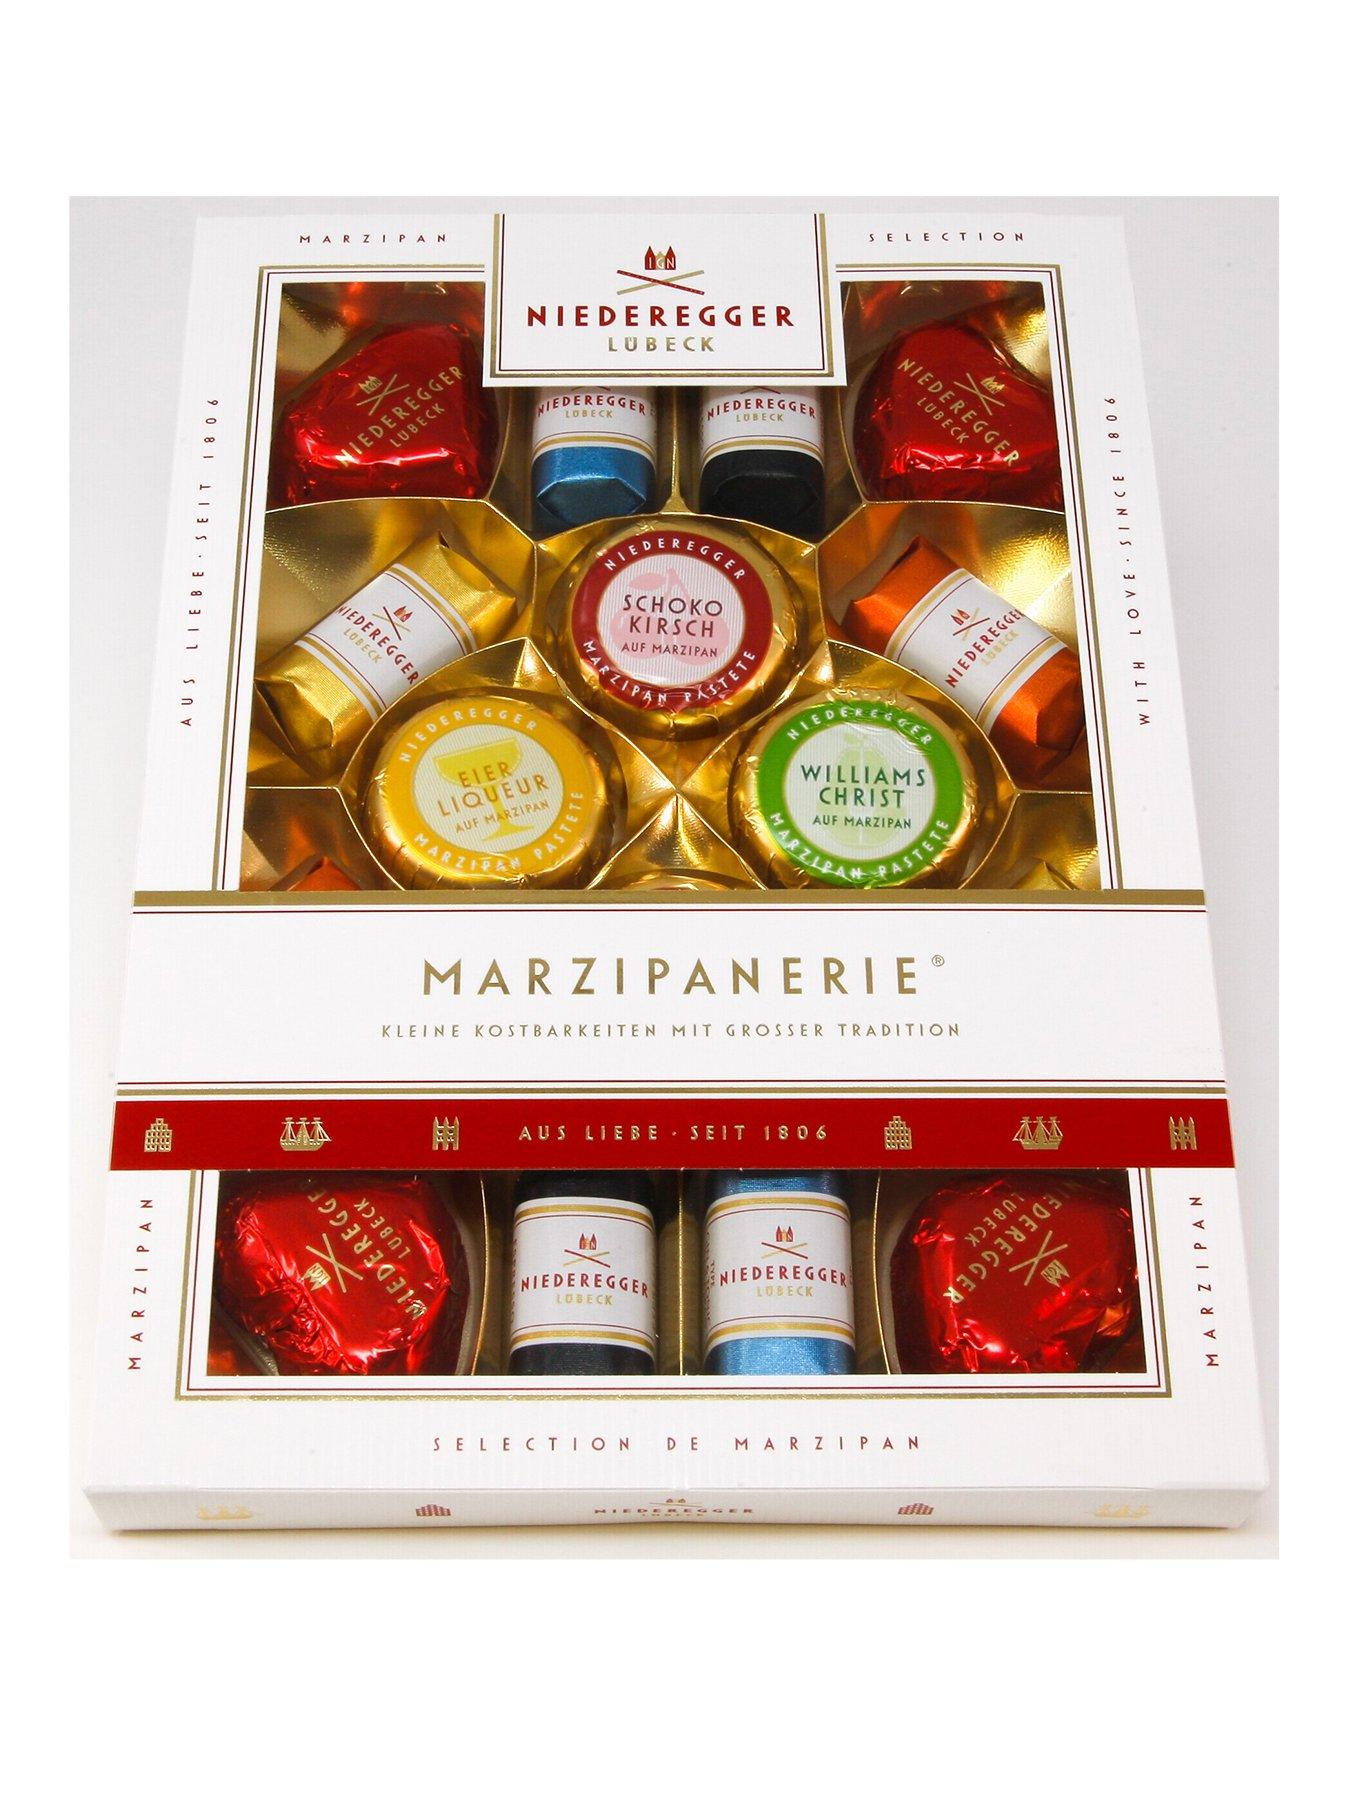 Marzipanerie - a selection of assorted marzipan treats | littlewoods.com